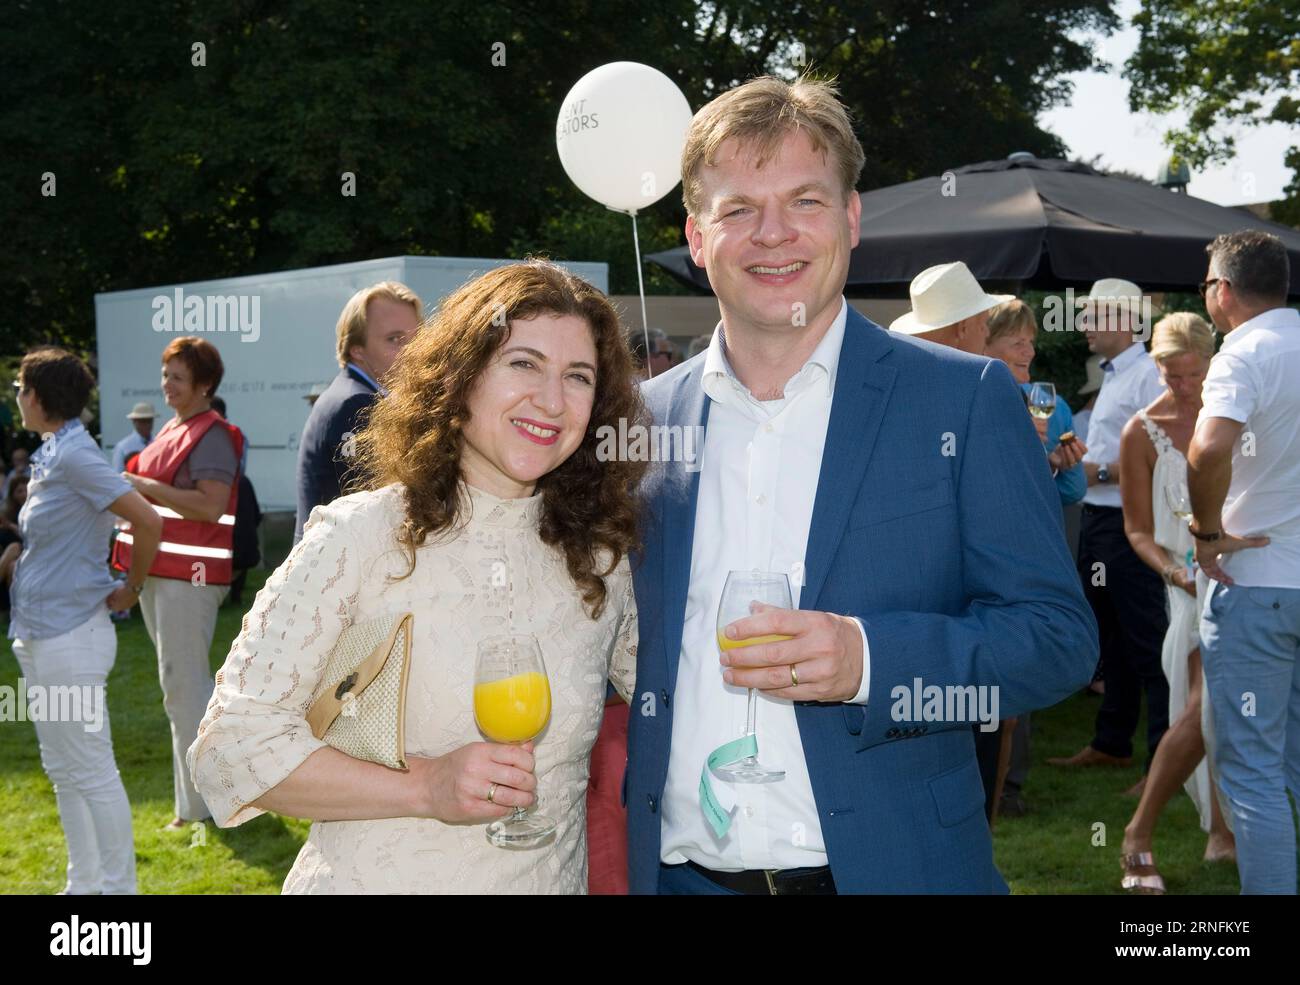 DE LUTTE, THE NETHERLANDS - AUG 30, 2015: Dutch politician Pieter Omtzigt with his wife Ayfer Koc Stock Photo